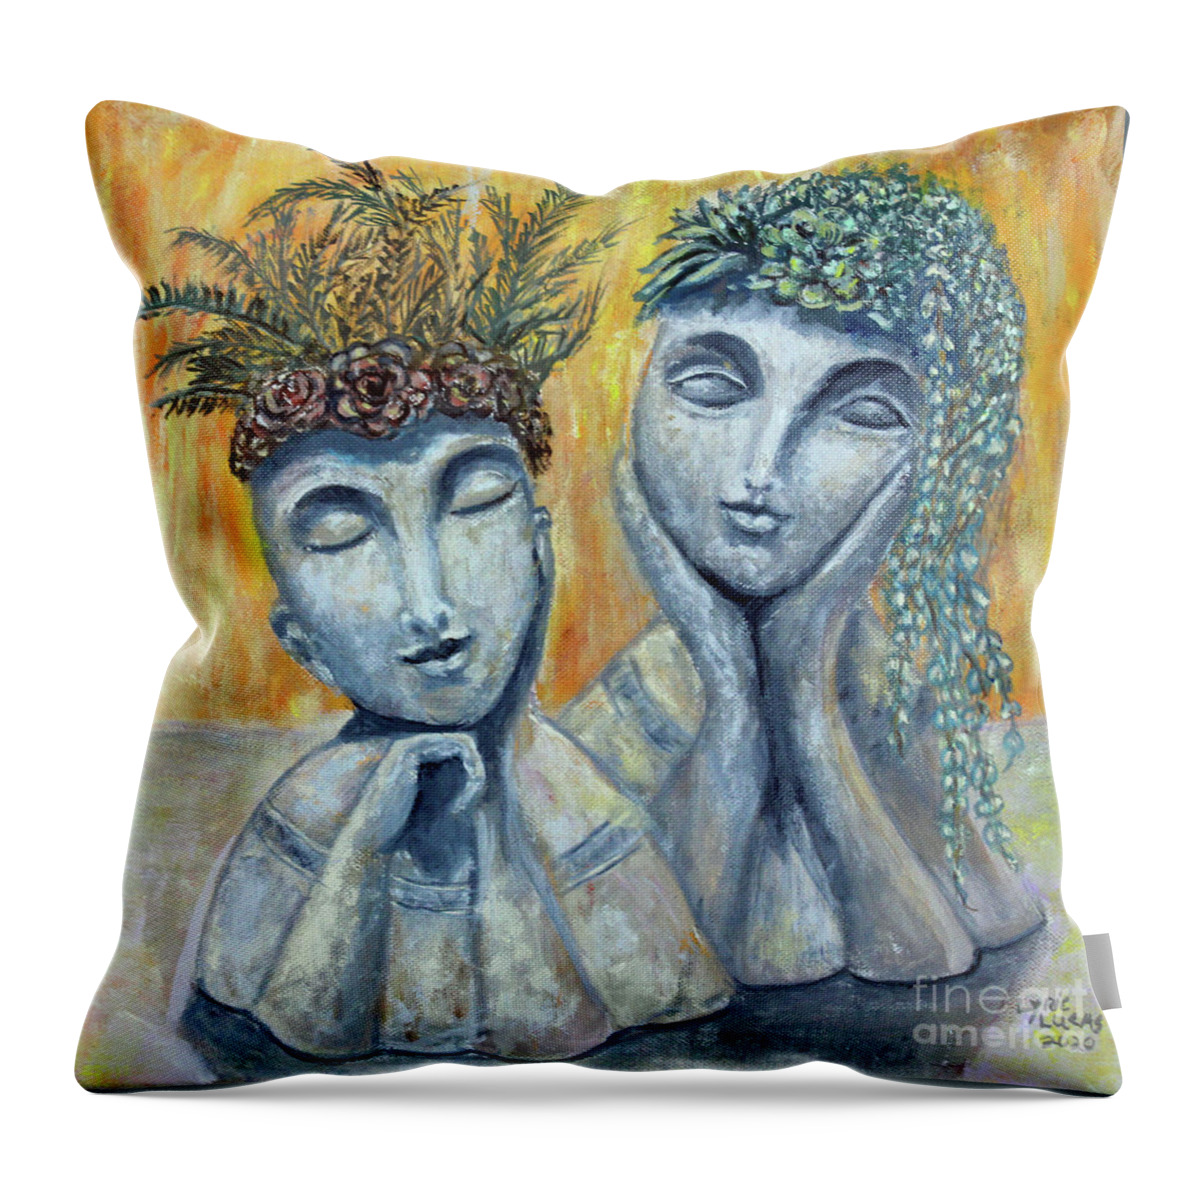 Still Life Throw Pillow featuring the painting Peaceful Planters by Lyric Lucas